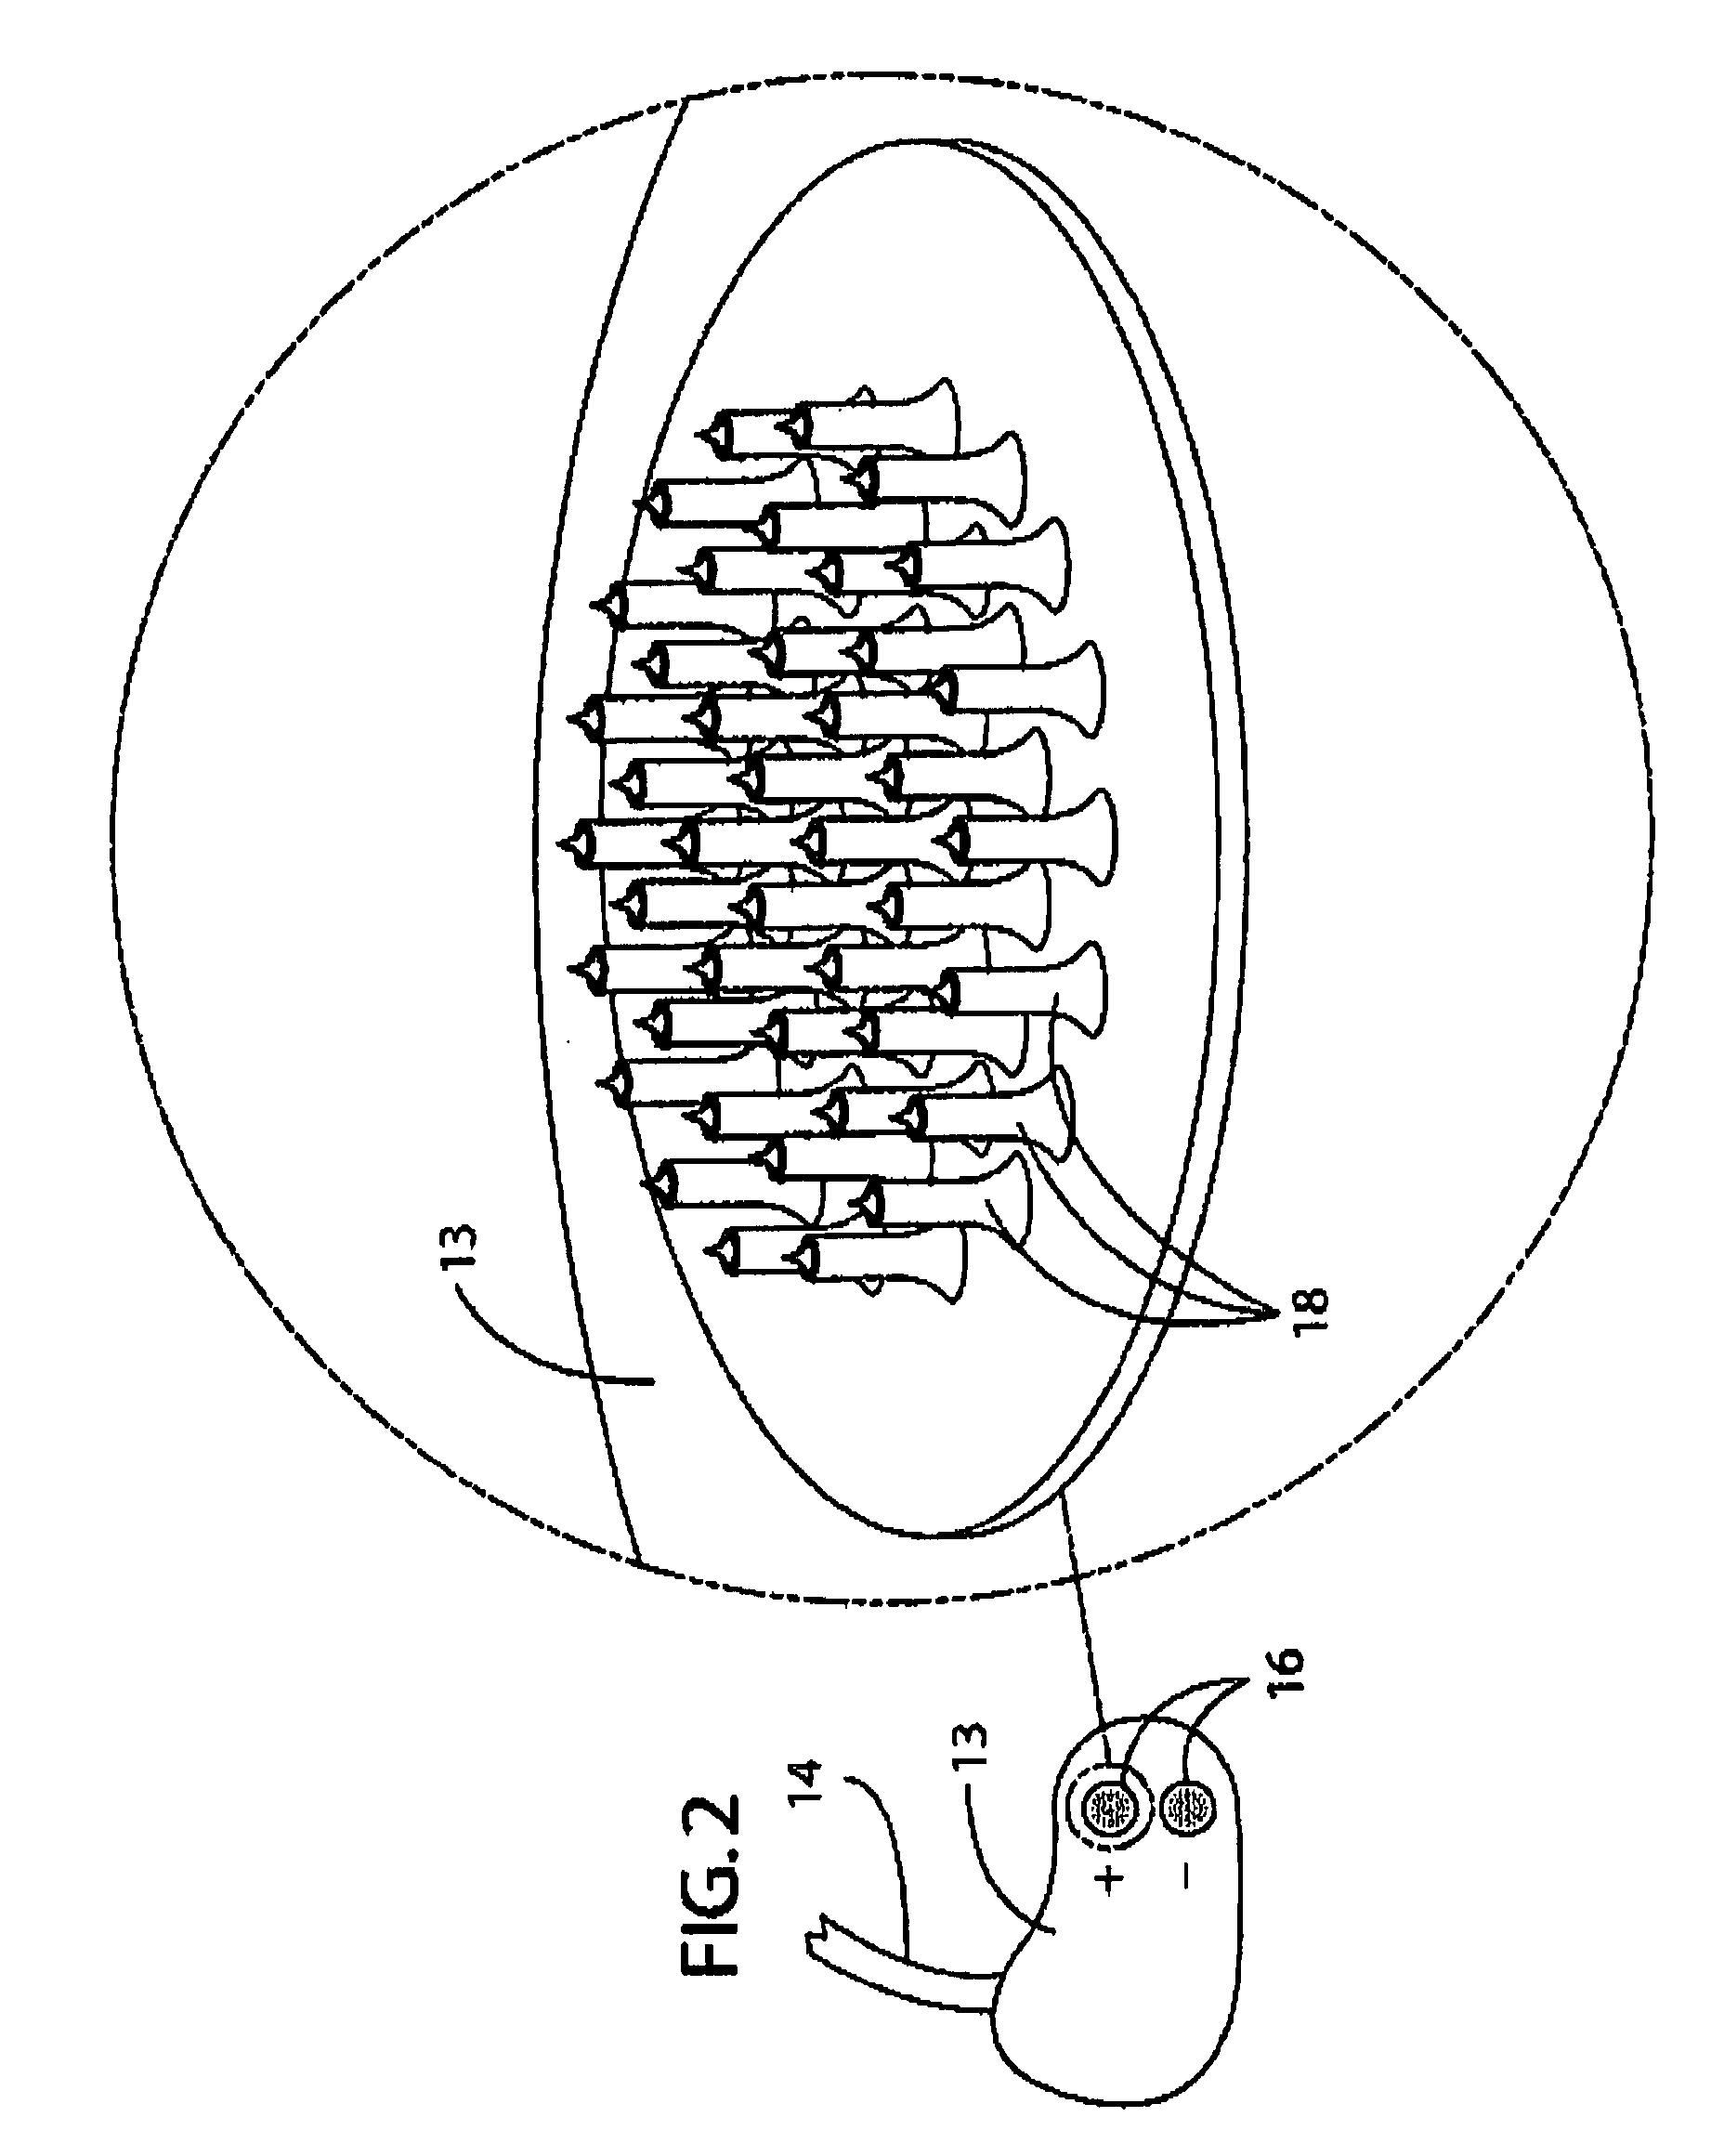 Non-invasive device and method for electrical stimulation of neural tissue